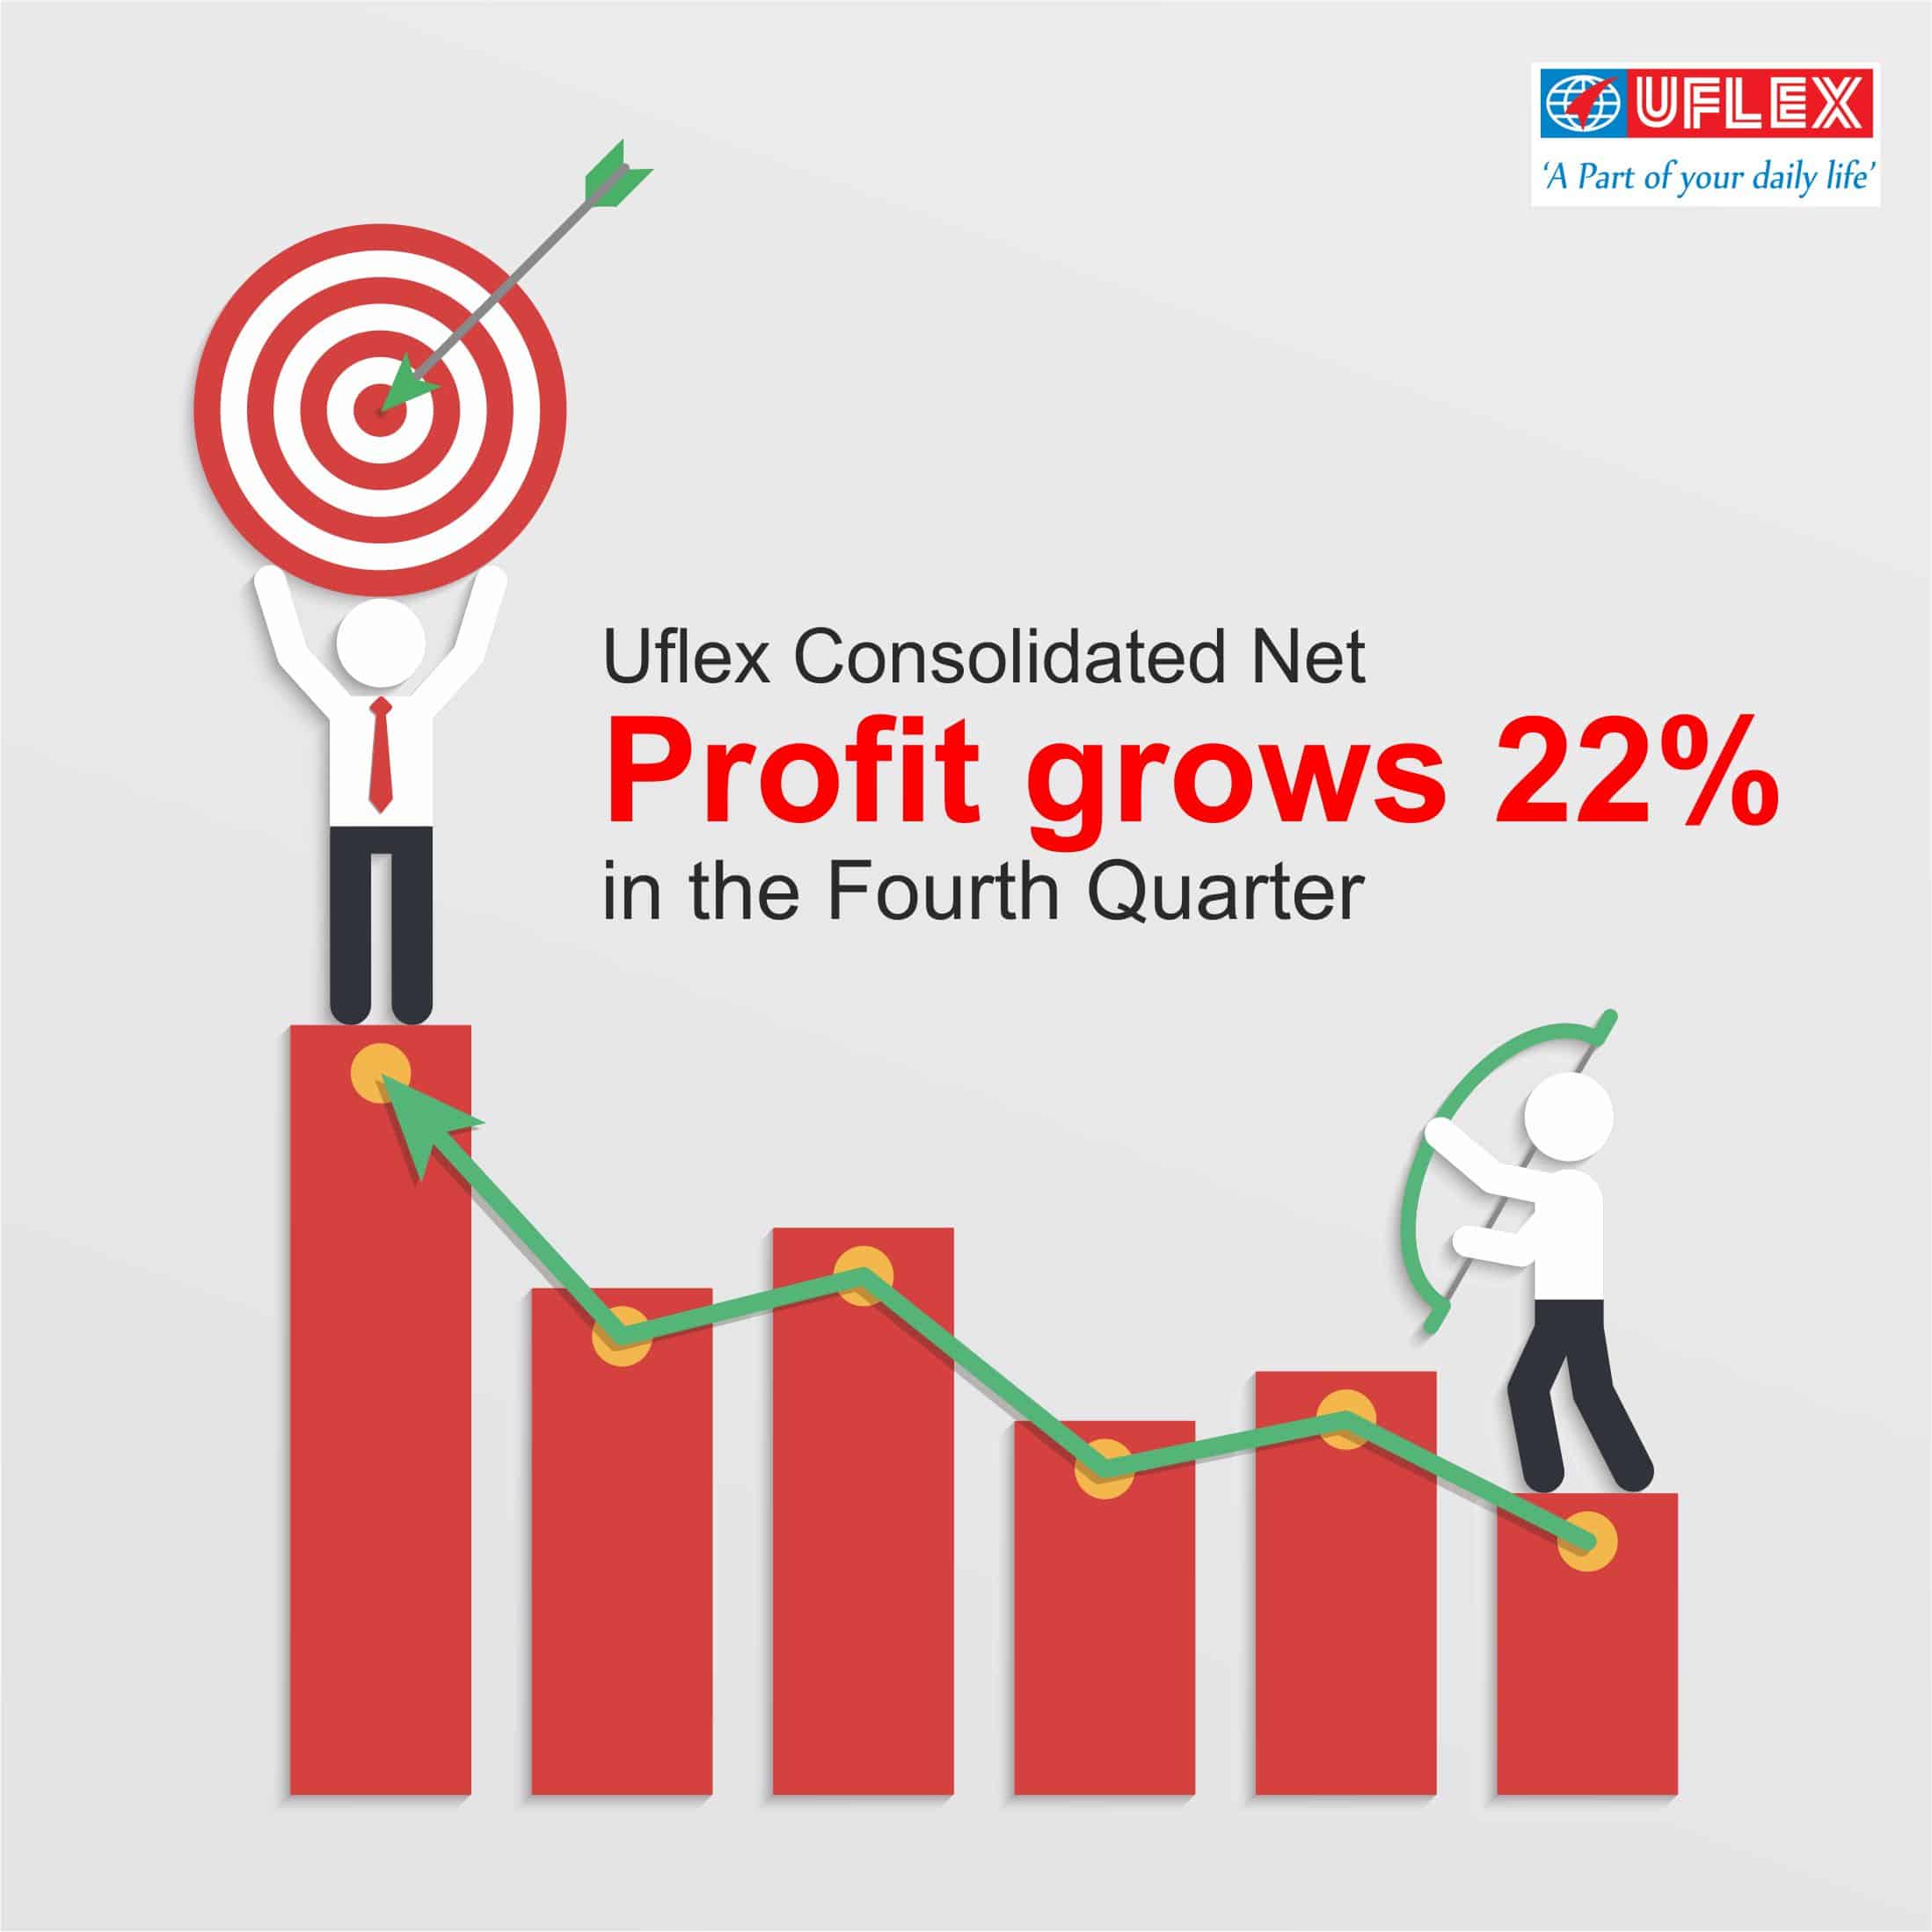 UFlex Consolidated Net Profit grows 22% in the Fourth Quarter